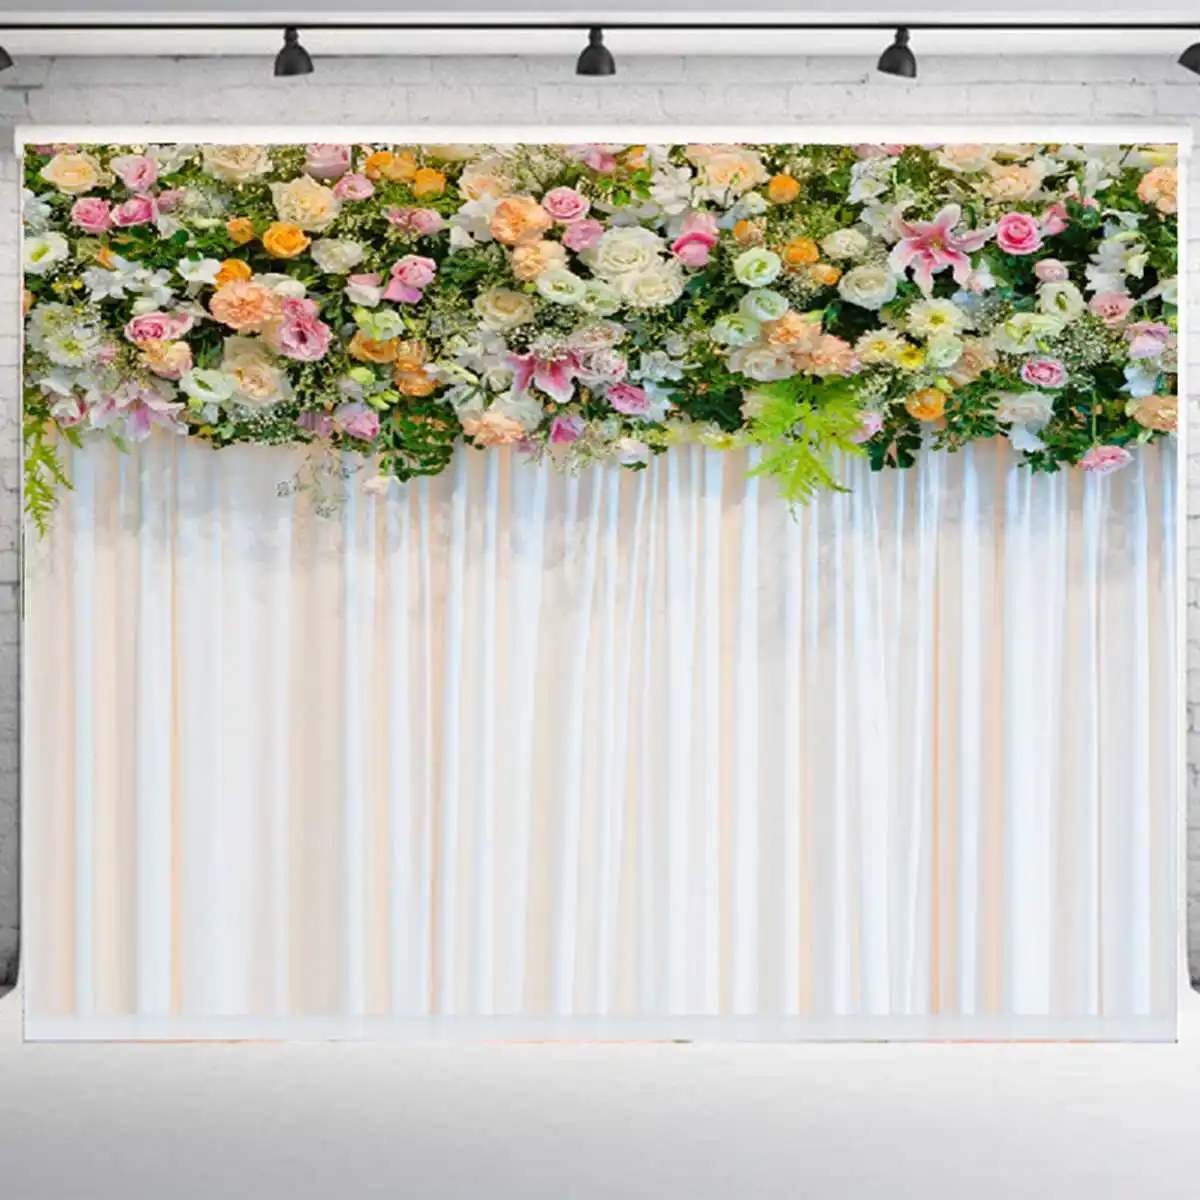 Laeacco 10x6.5ft Flower Decoration Wall Photo Booth Vinyl Photography Background Wedding Ceremony Anniversary Backdrop Lovers Valentines Day Bride Groom Photo Shoot Activities Banner Studio 